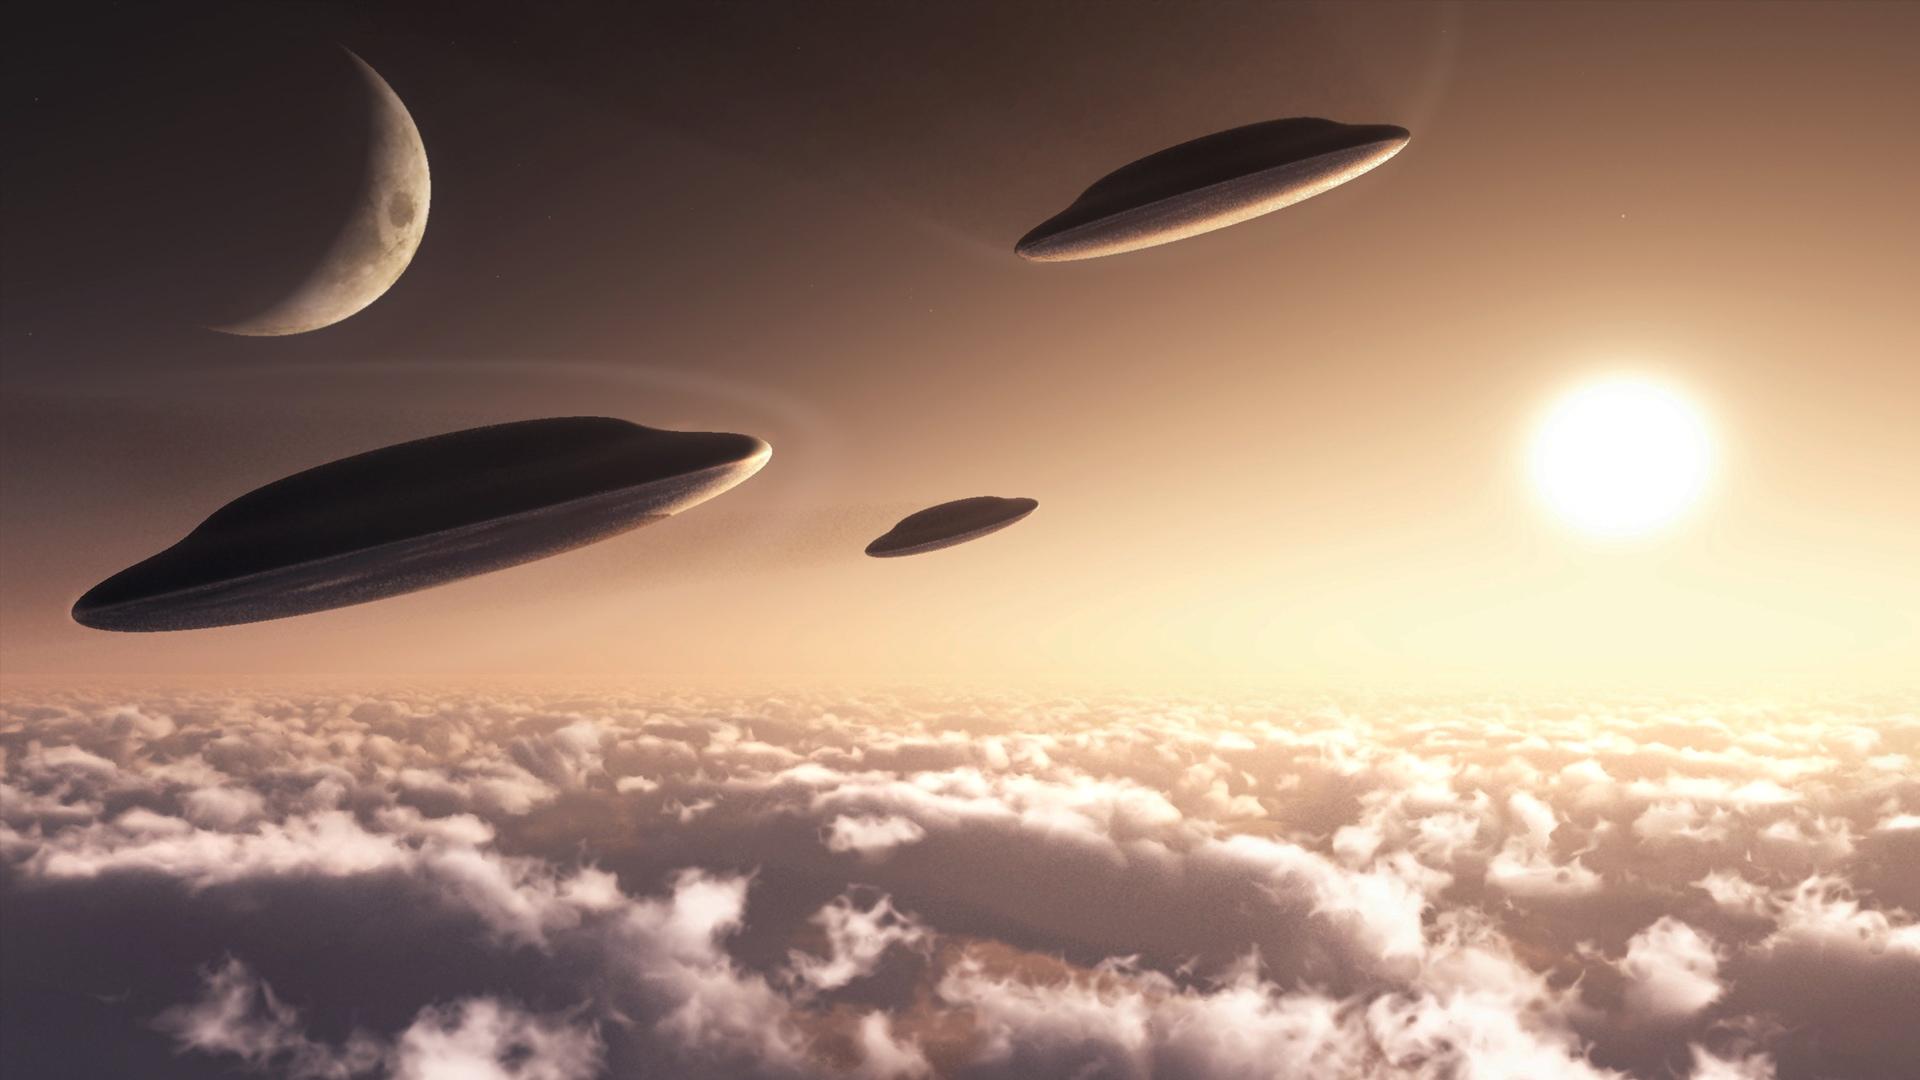 Ufo Wallpaper Amp Pictures